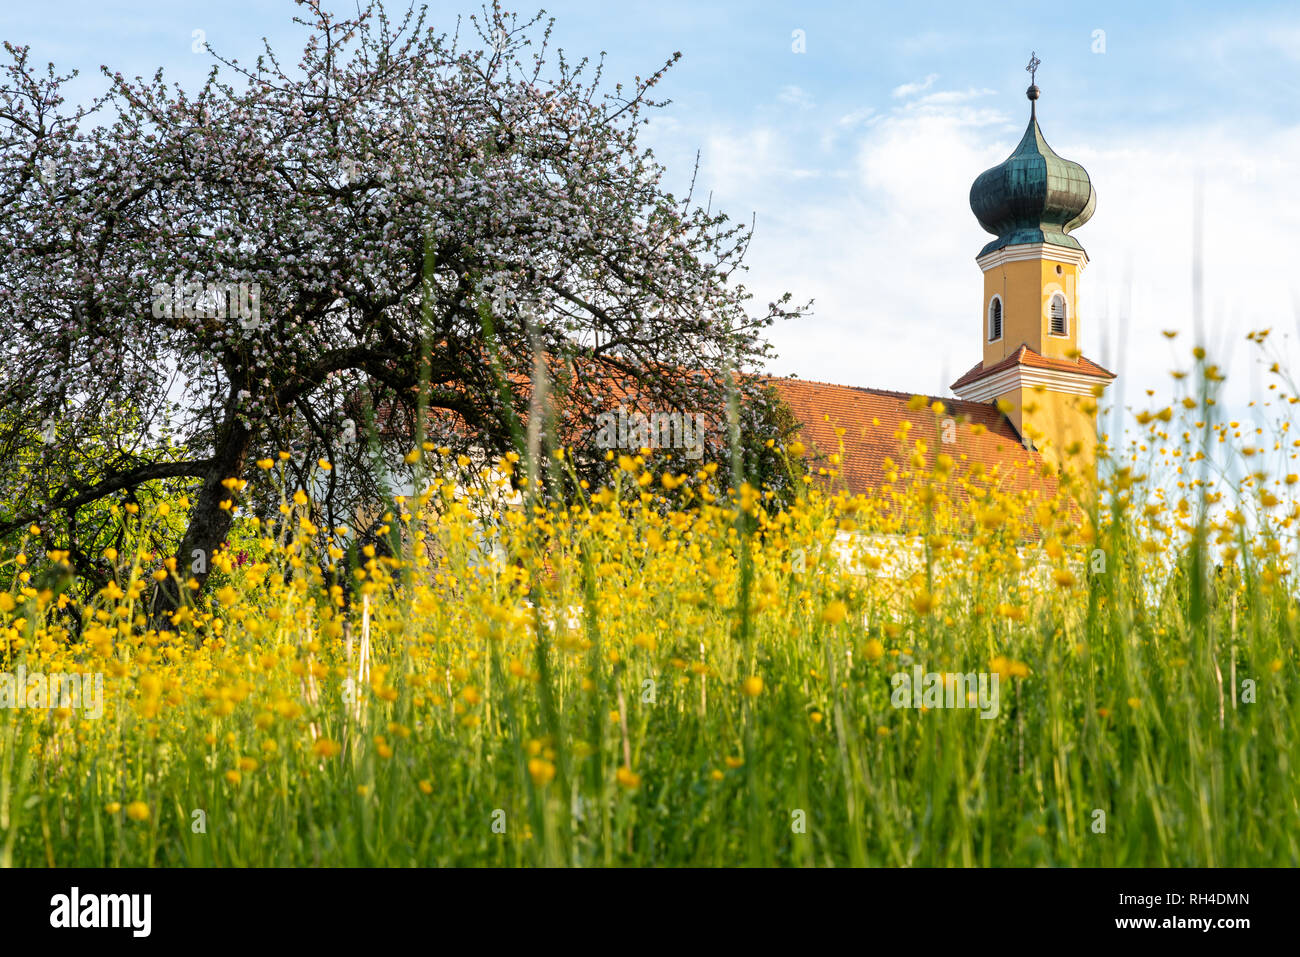 bavarian baroque church with an onion dome seen through a blooming meadow Stock Photo